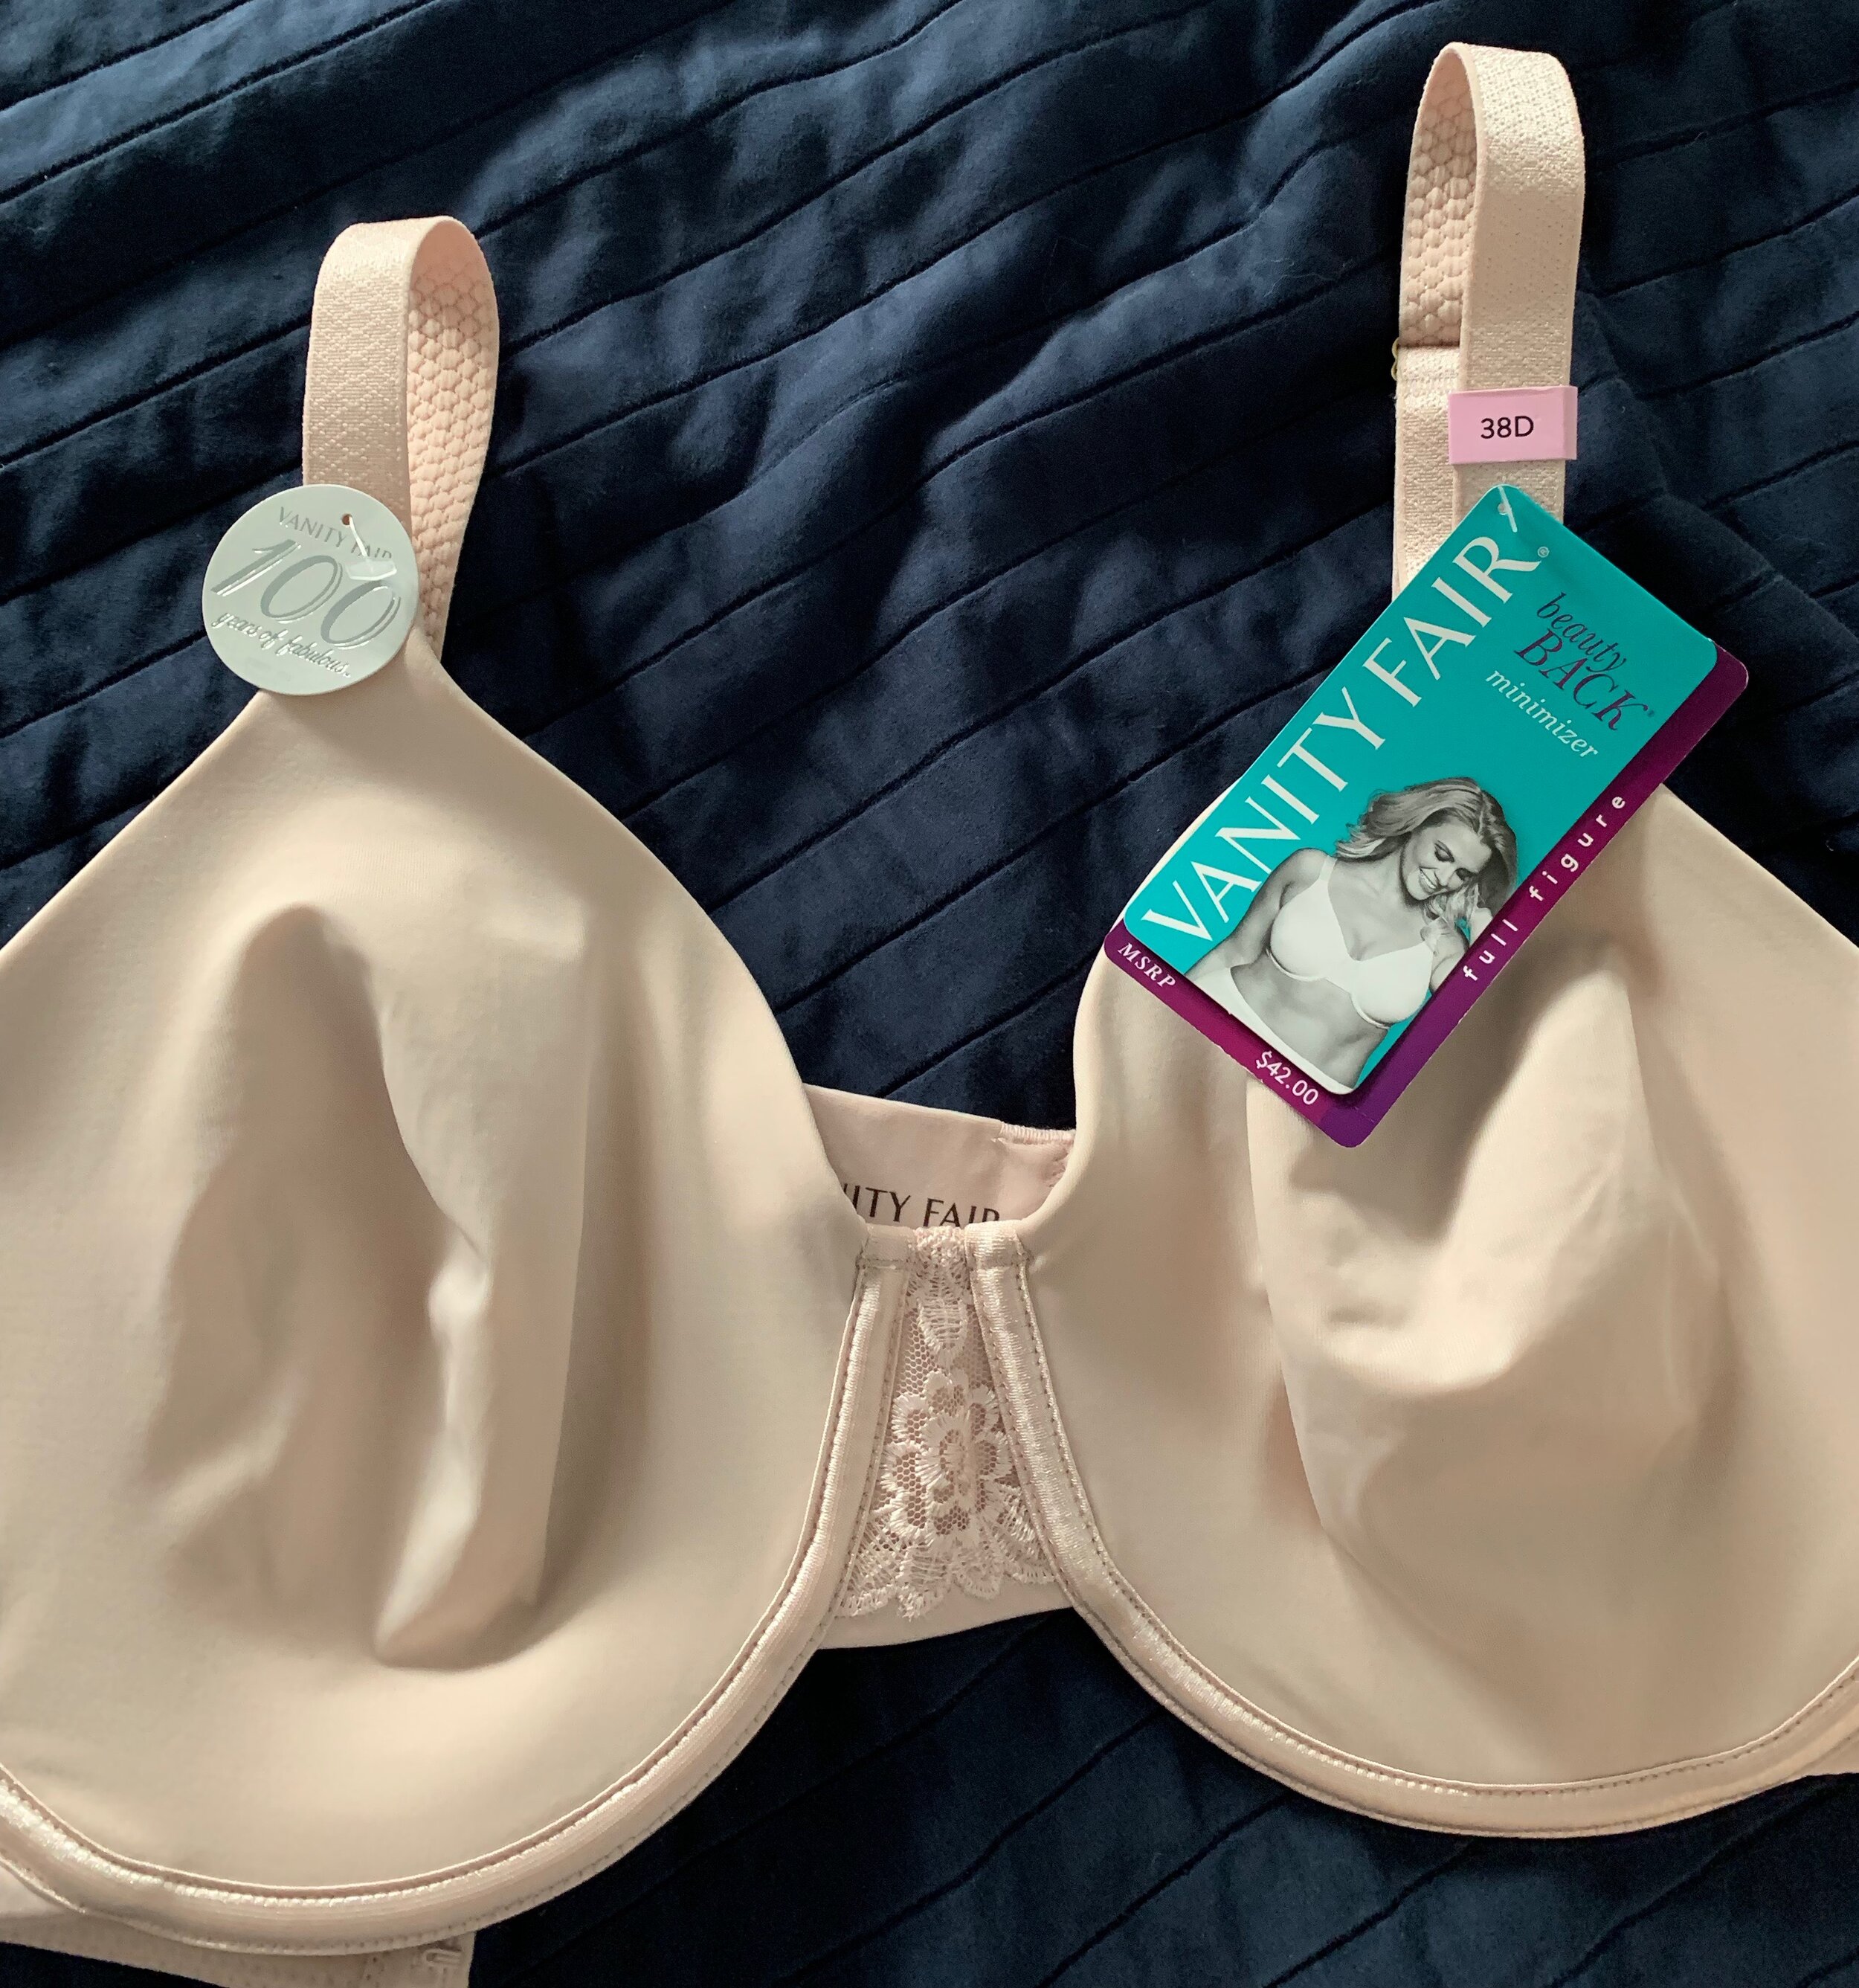 Fugue State Bra Shopping — Mood and Clothes